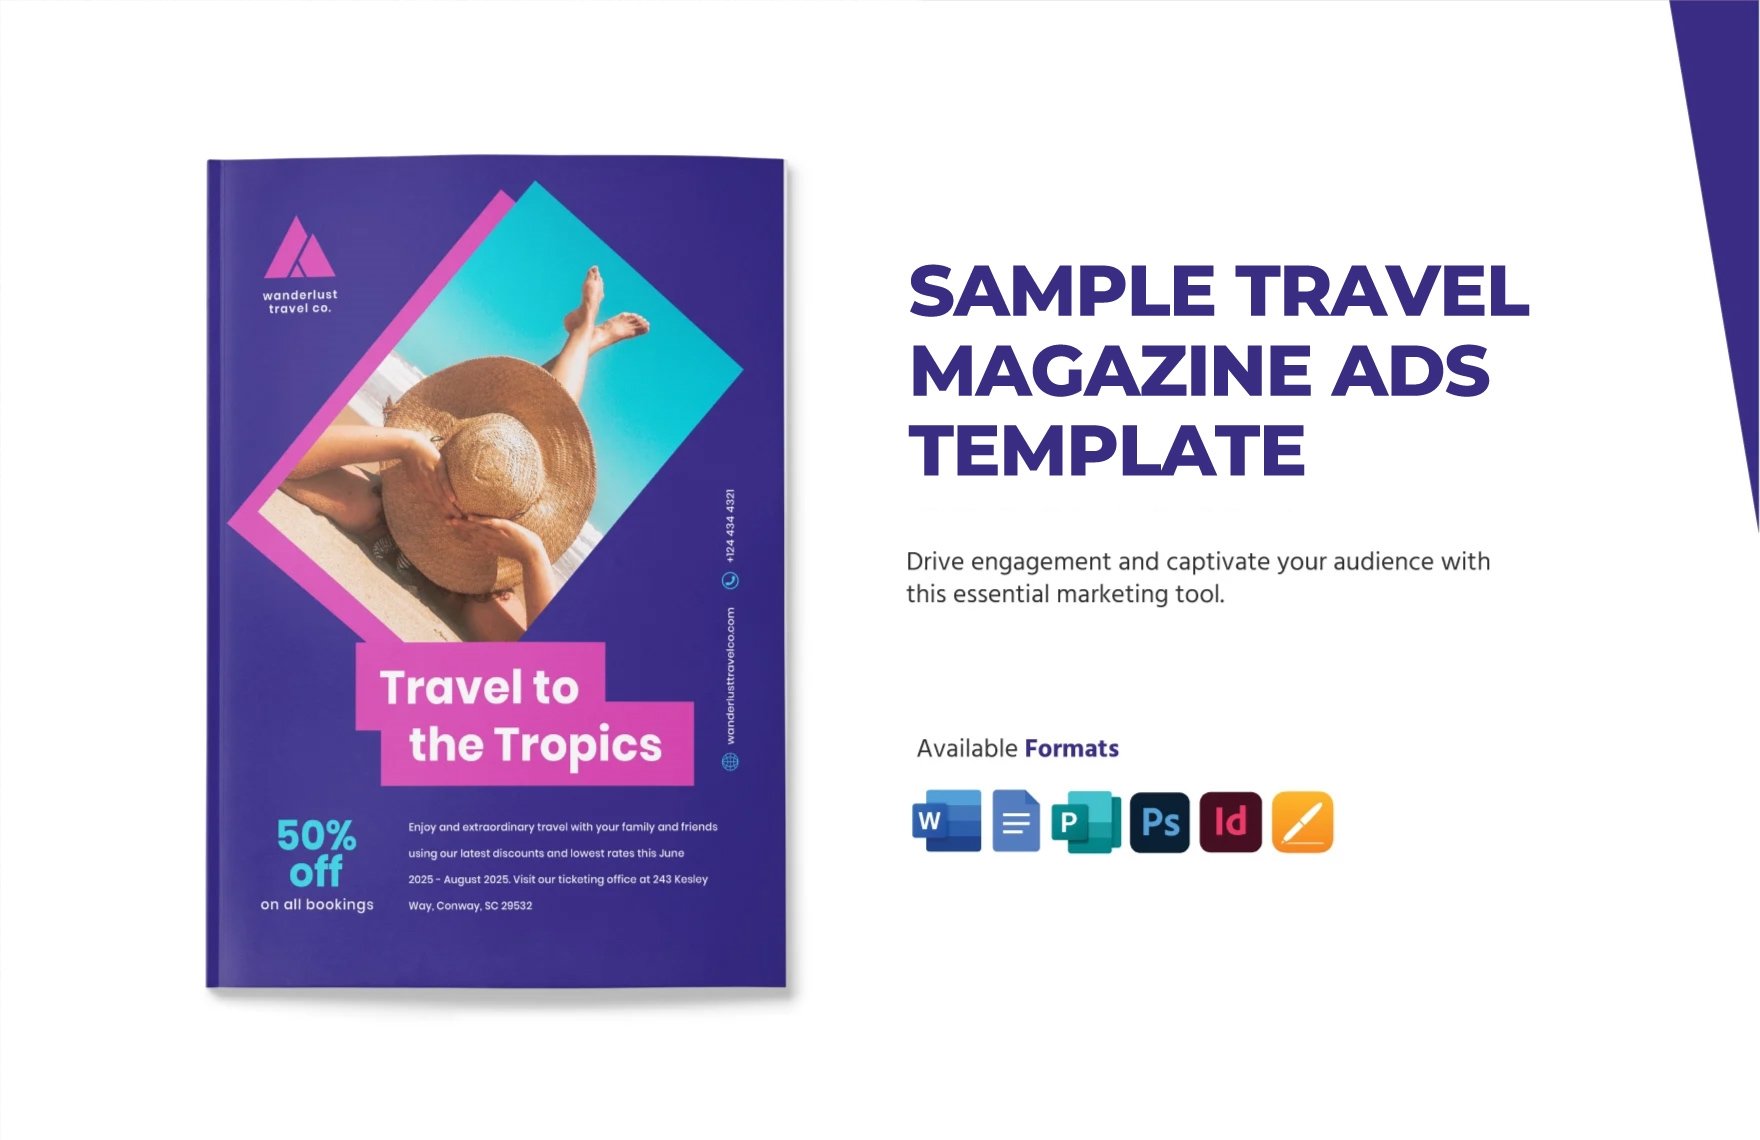 Free Sample Travel Magazine Ads Template in Word, Google Docs, PSD, Apple Pages, Publisher, InDesign